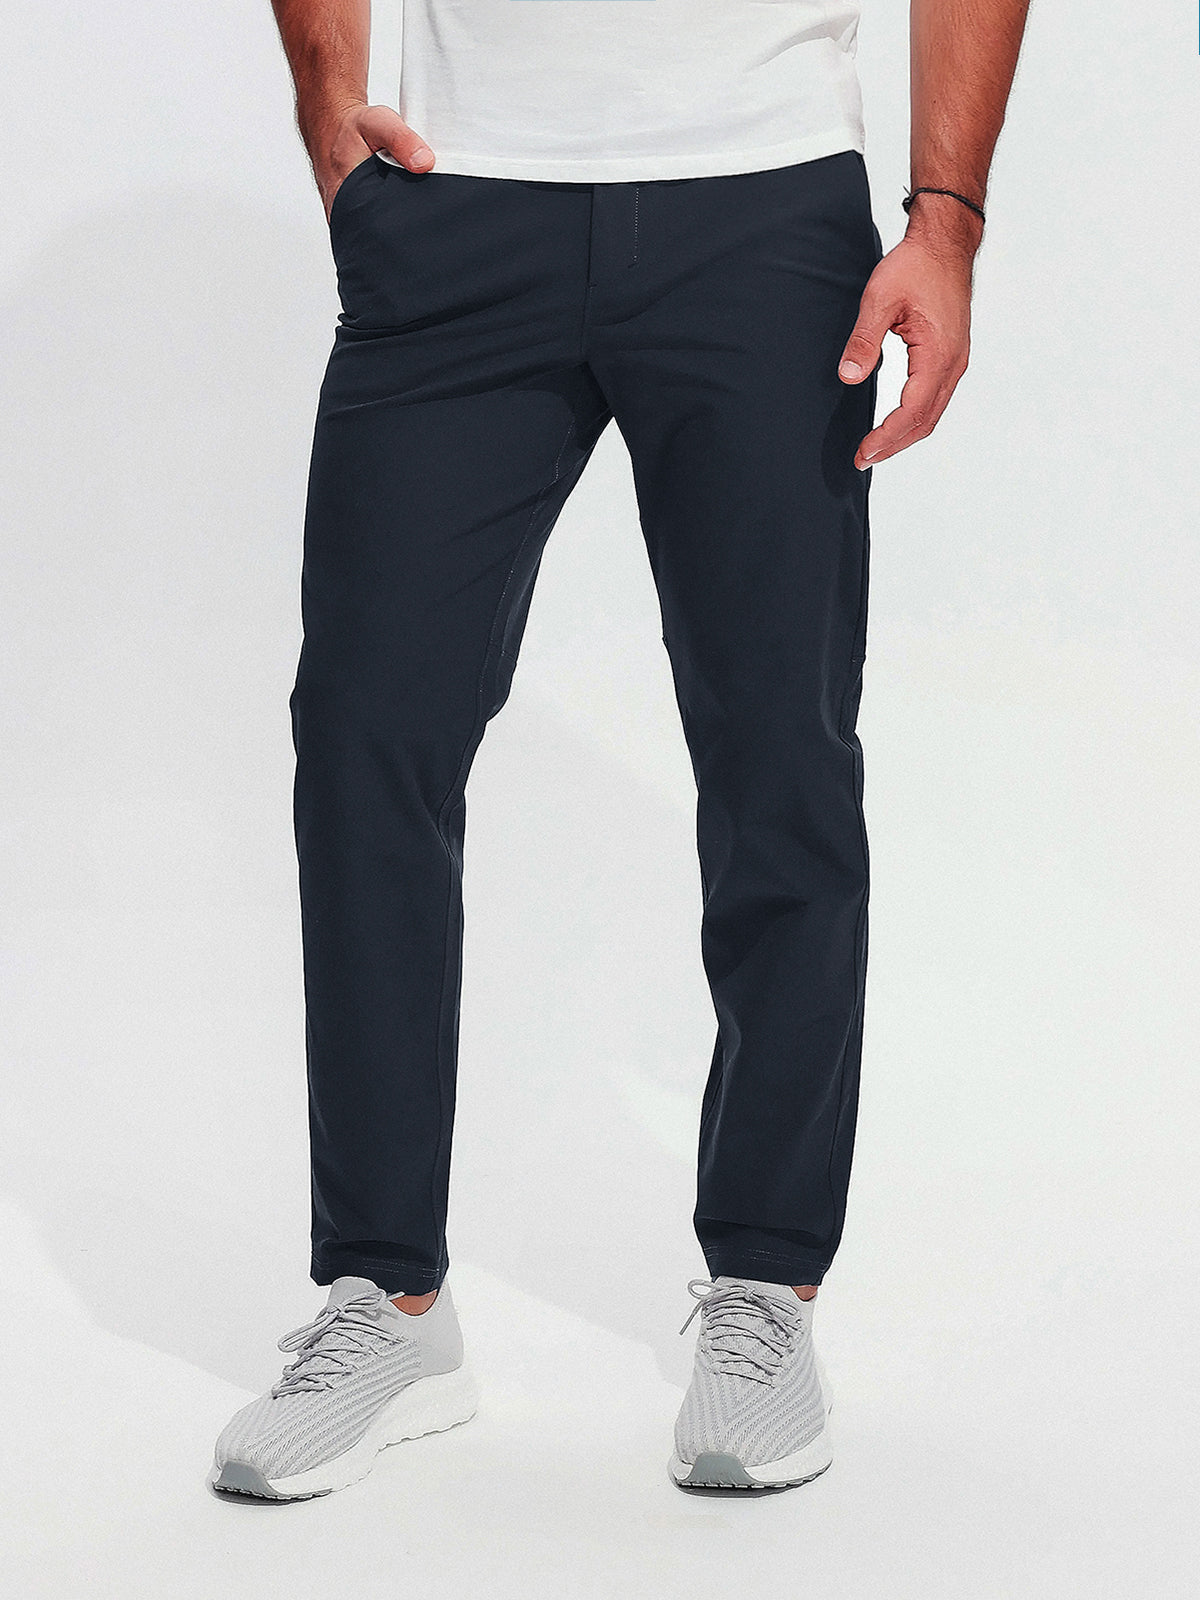 M's Commission Everyday Performance Chino Pants Iron Blue-Zittor